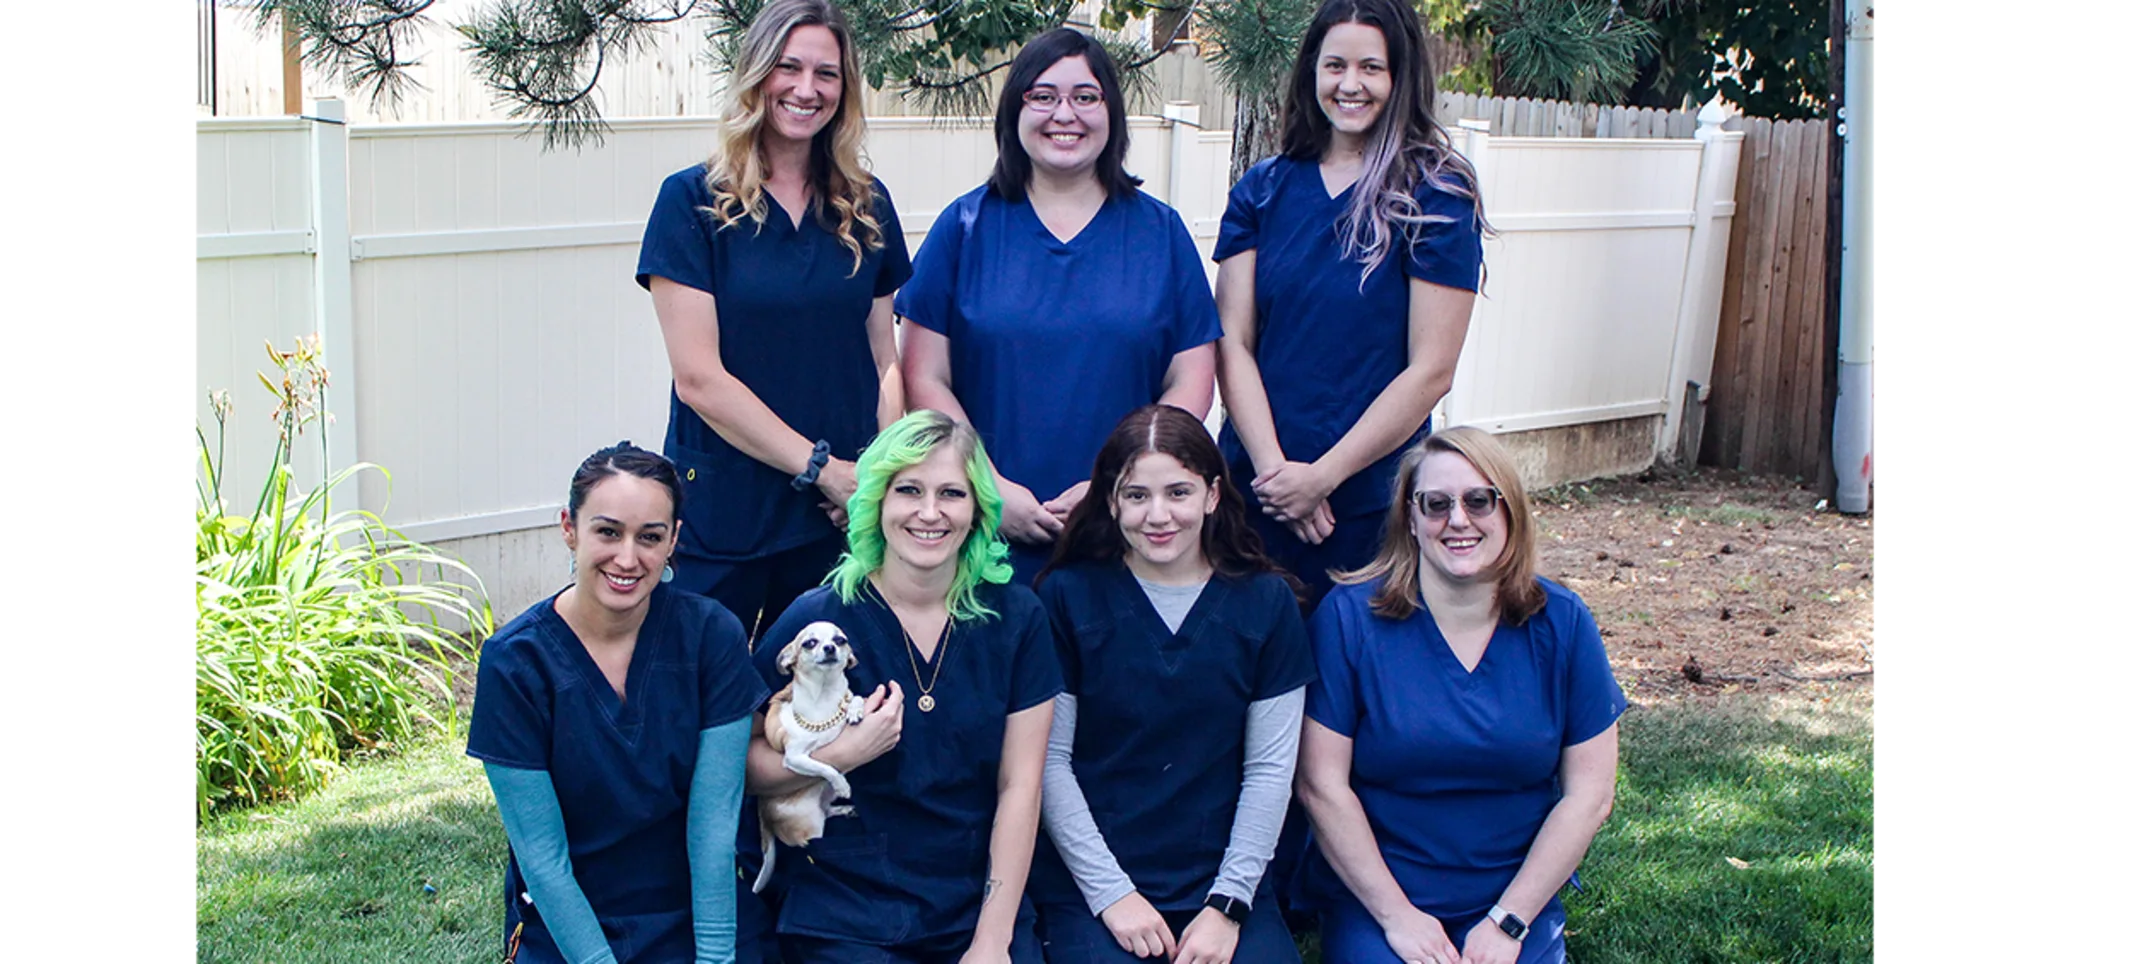 Client Service Team at Overland Animal Hospital.